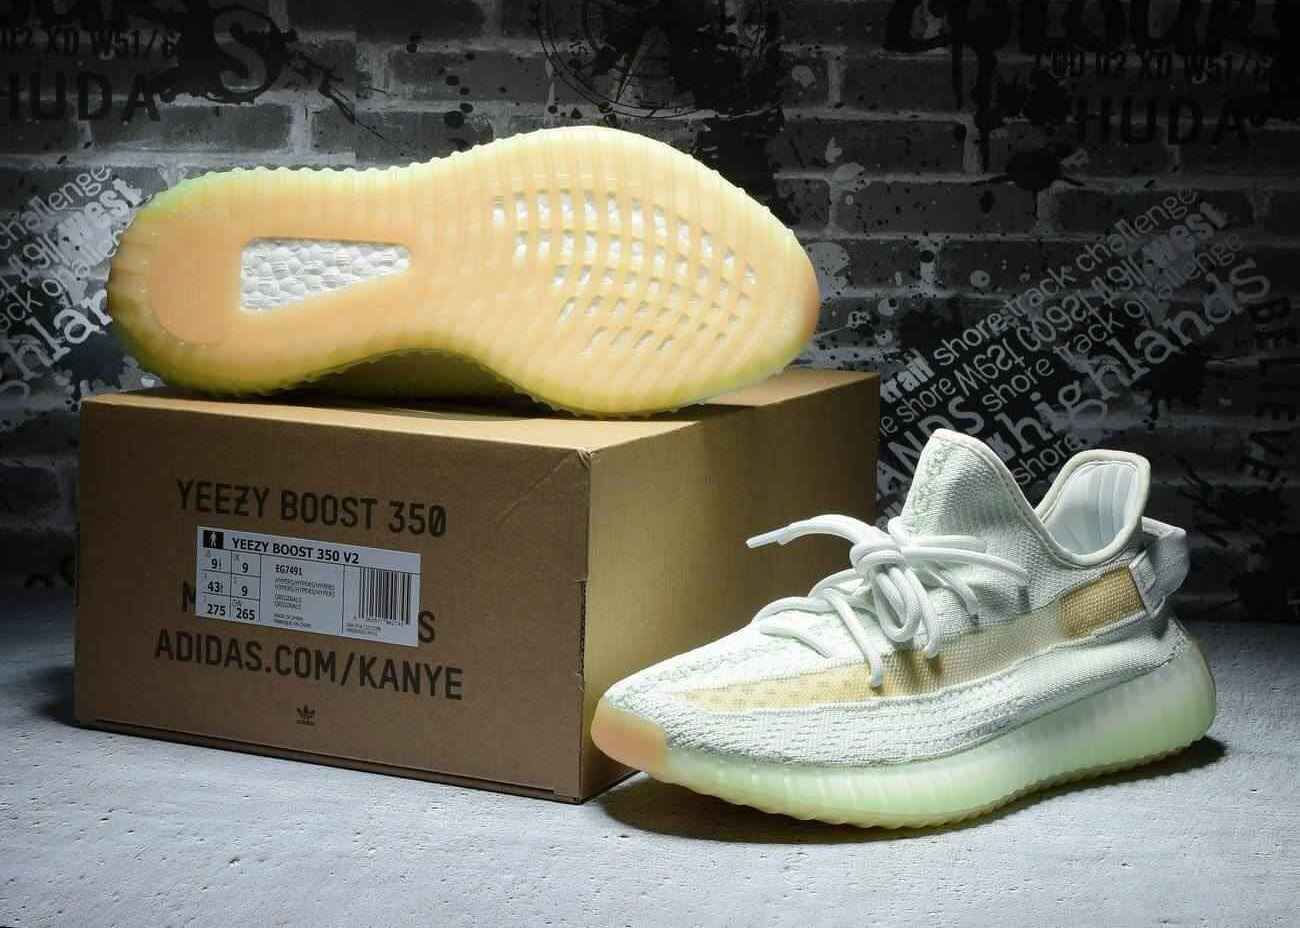 Adidas Yeezy Boost 350-V2 Hyperspace